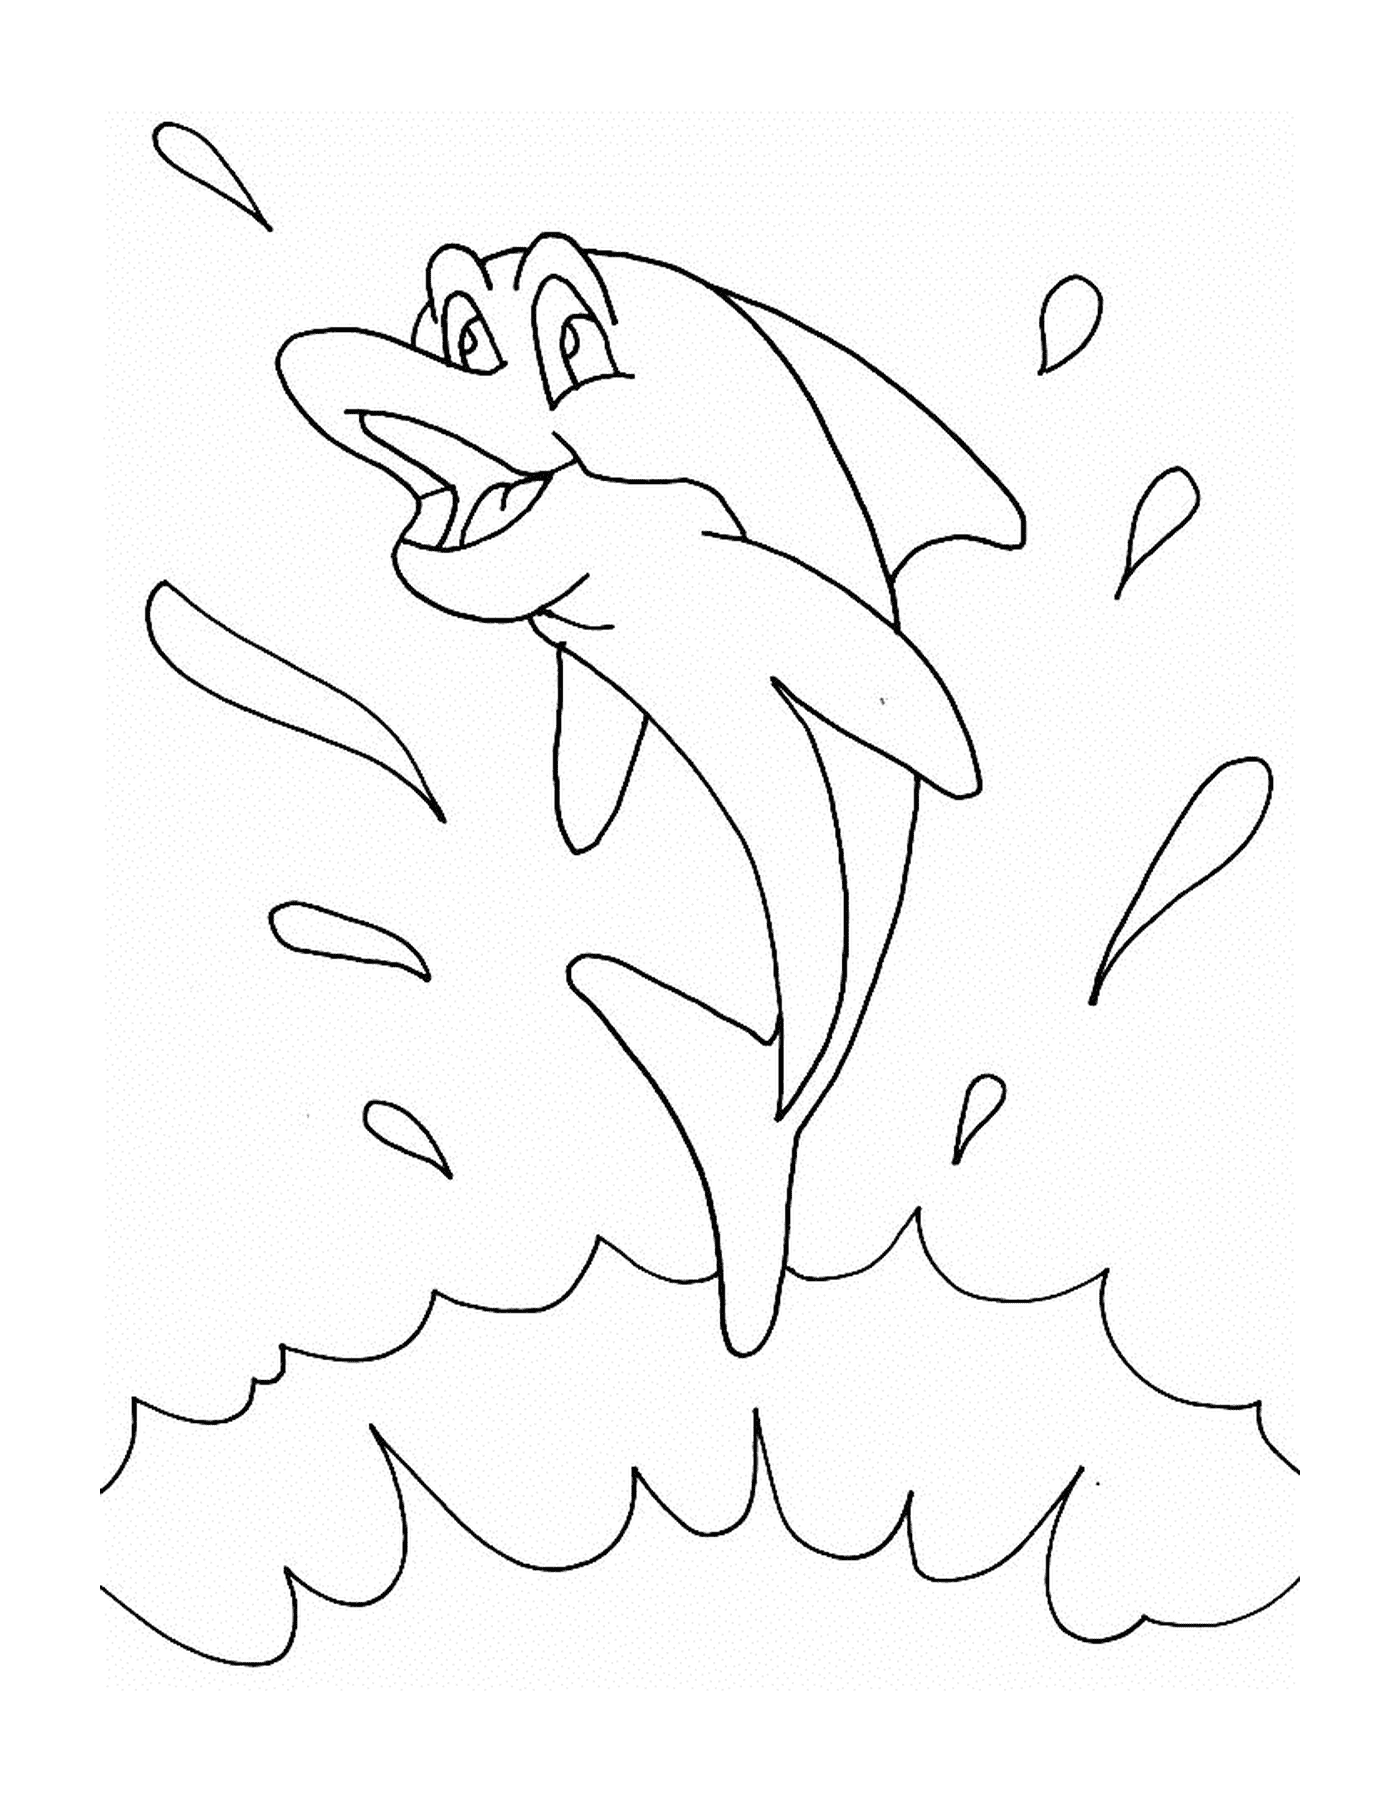  A dolphin that jumps and splashes 